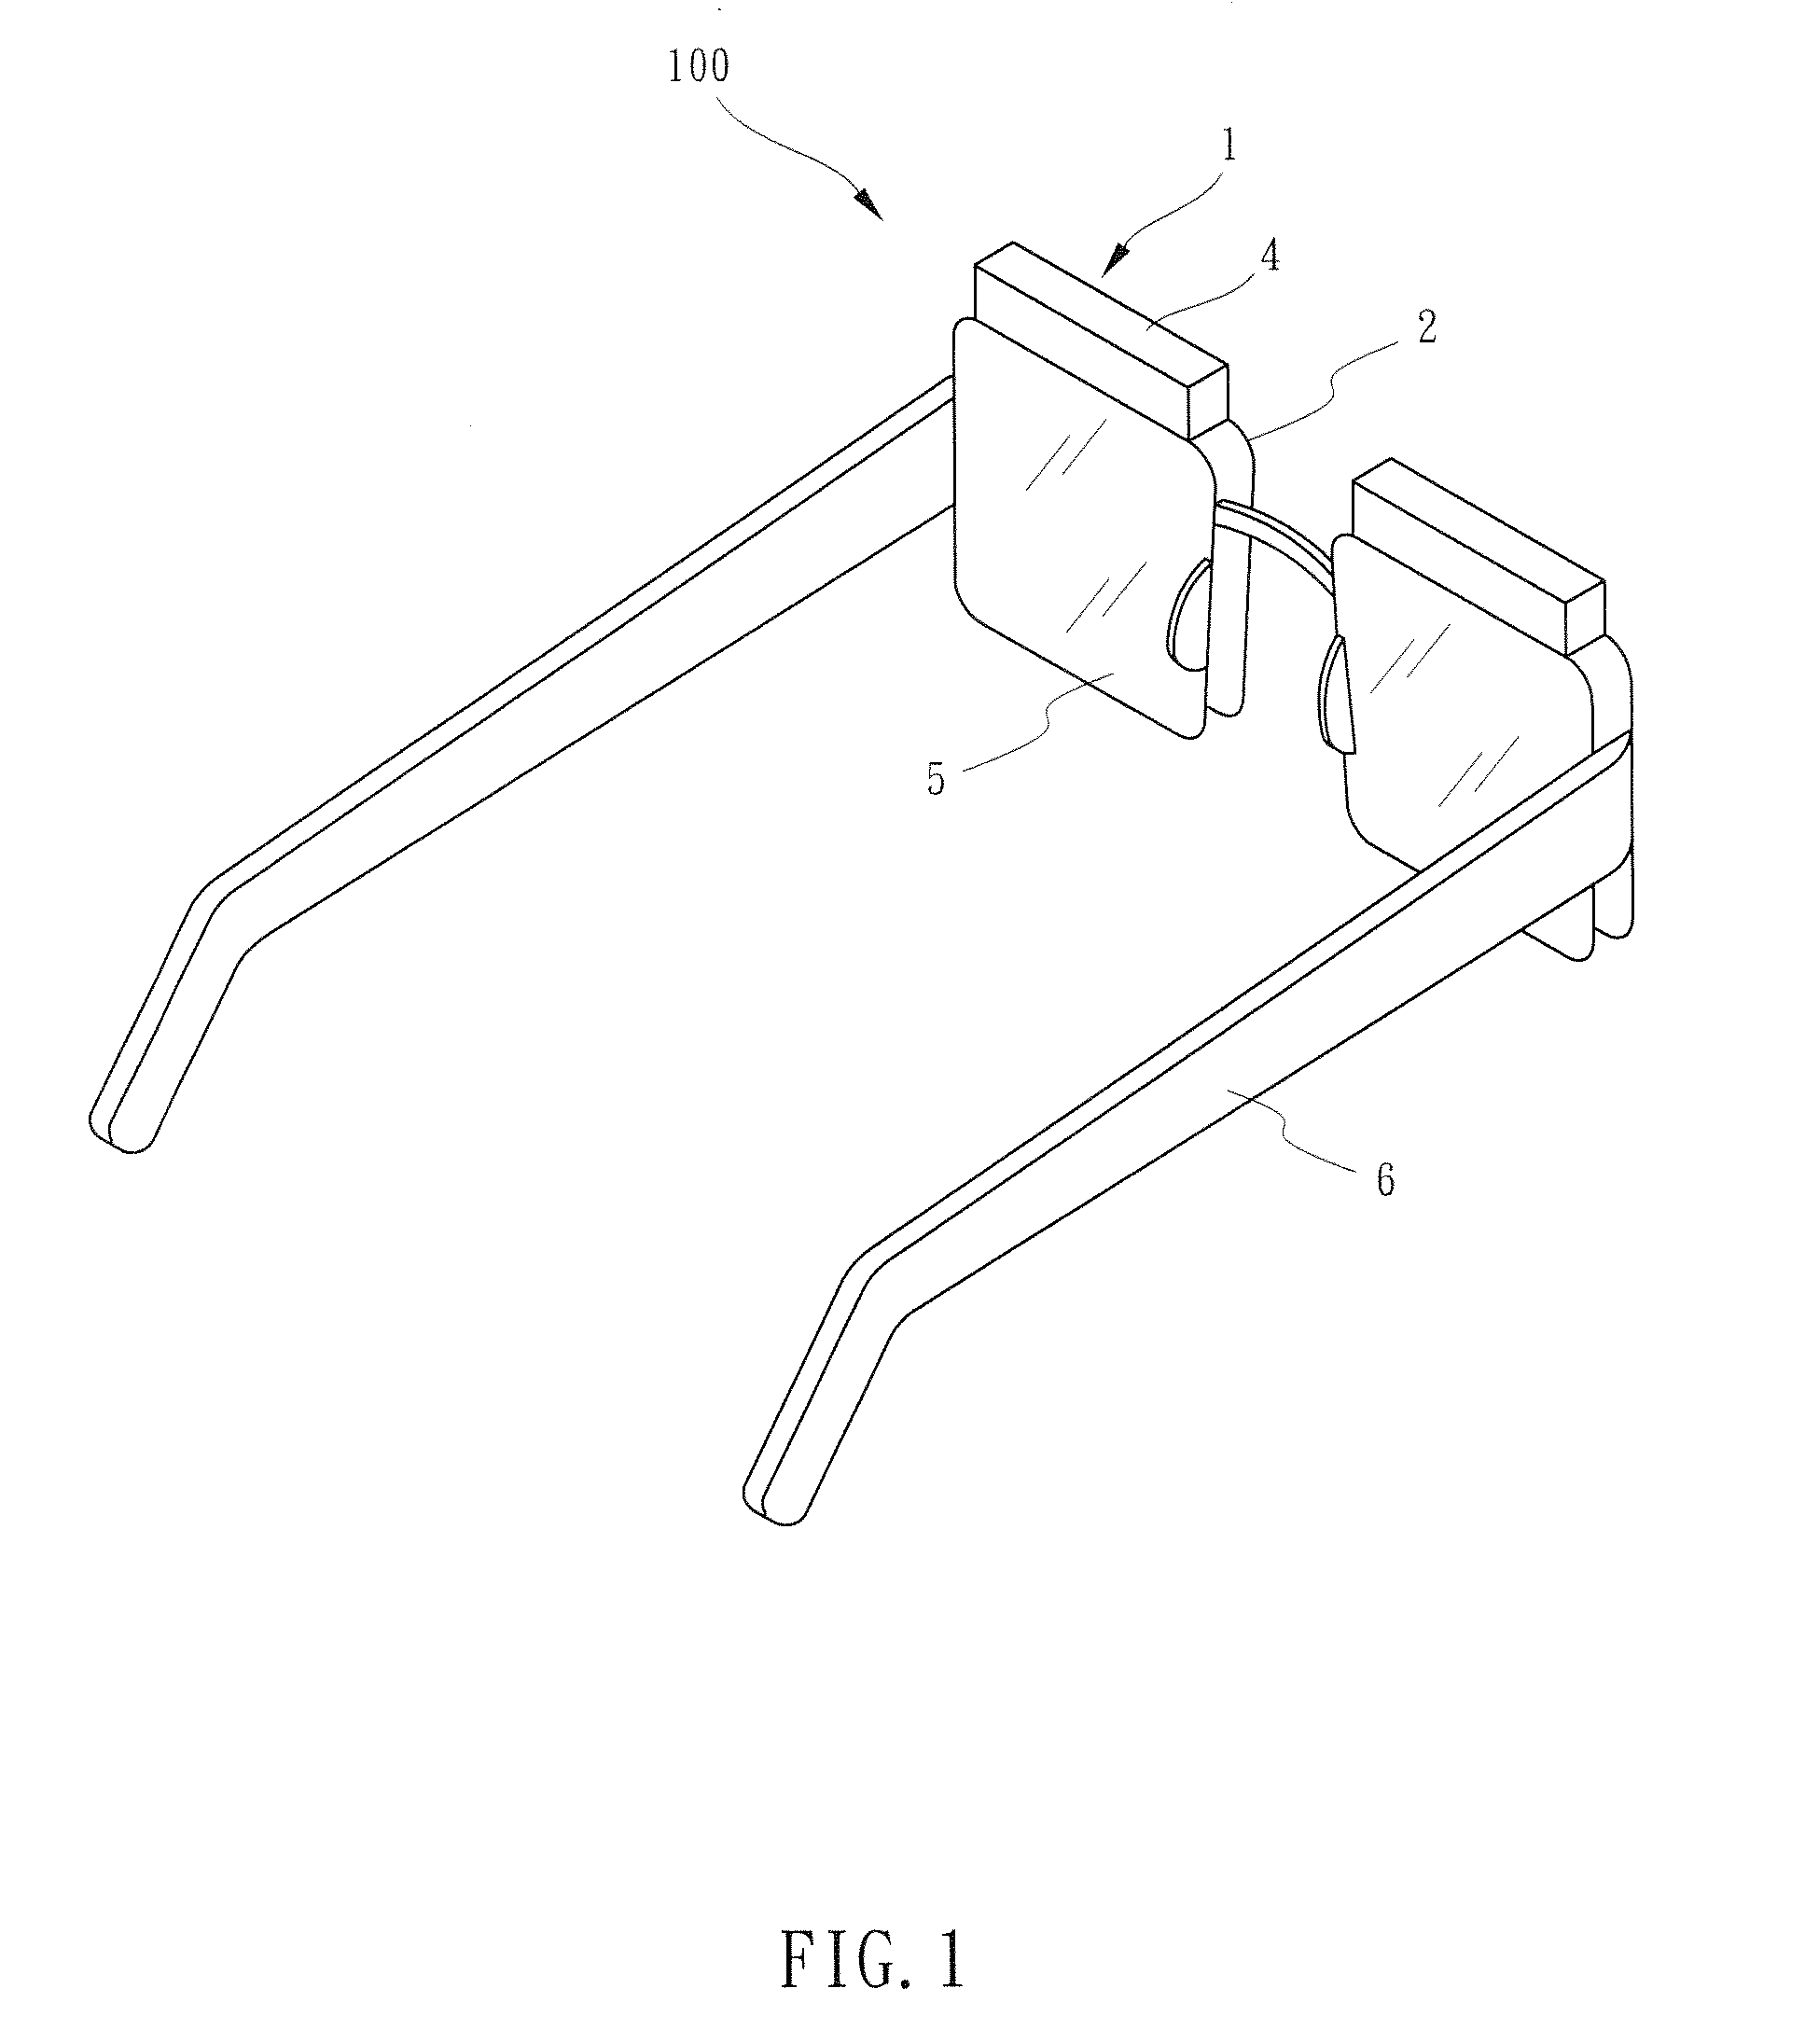 Optical head-mounted display with mechanical one-dimensional scanner